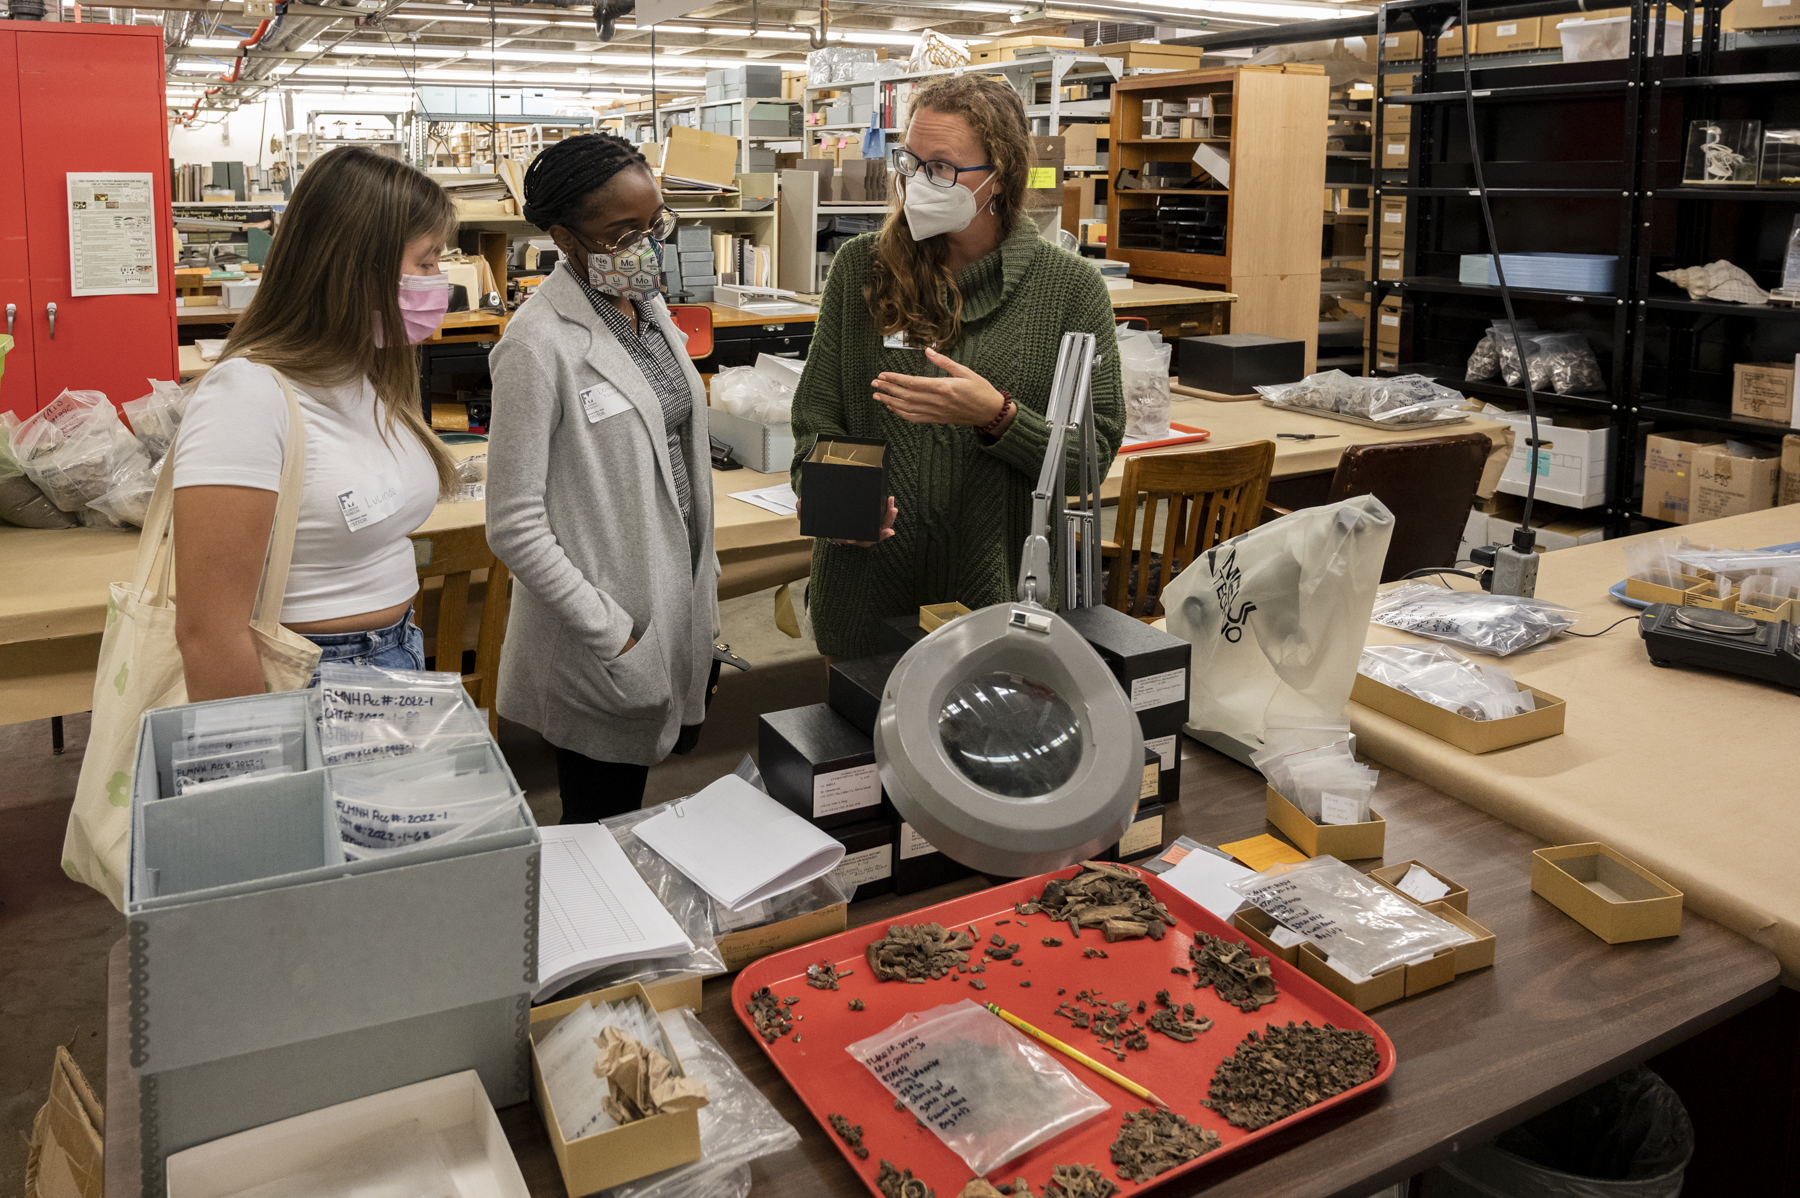 Jennifer Green shows museum specimens to visiting students